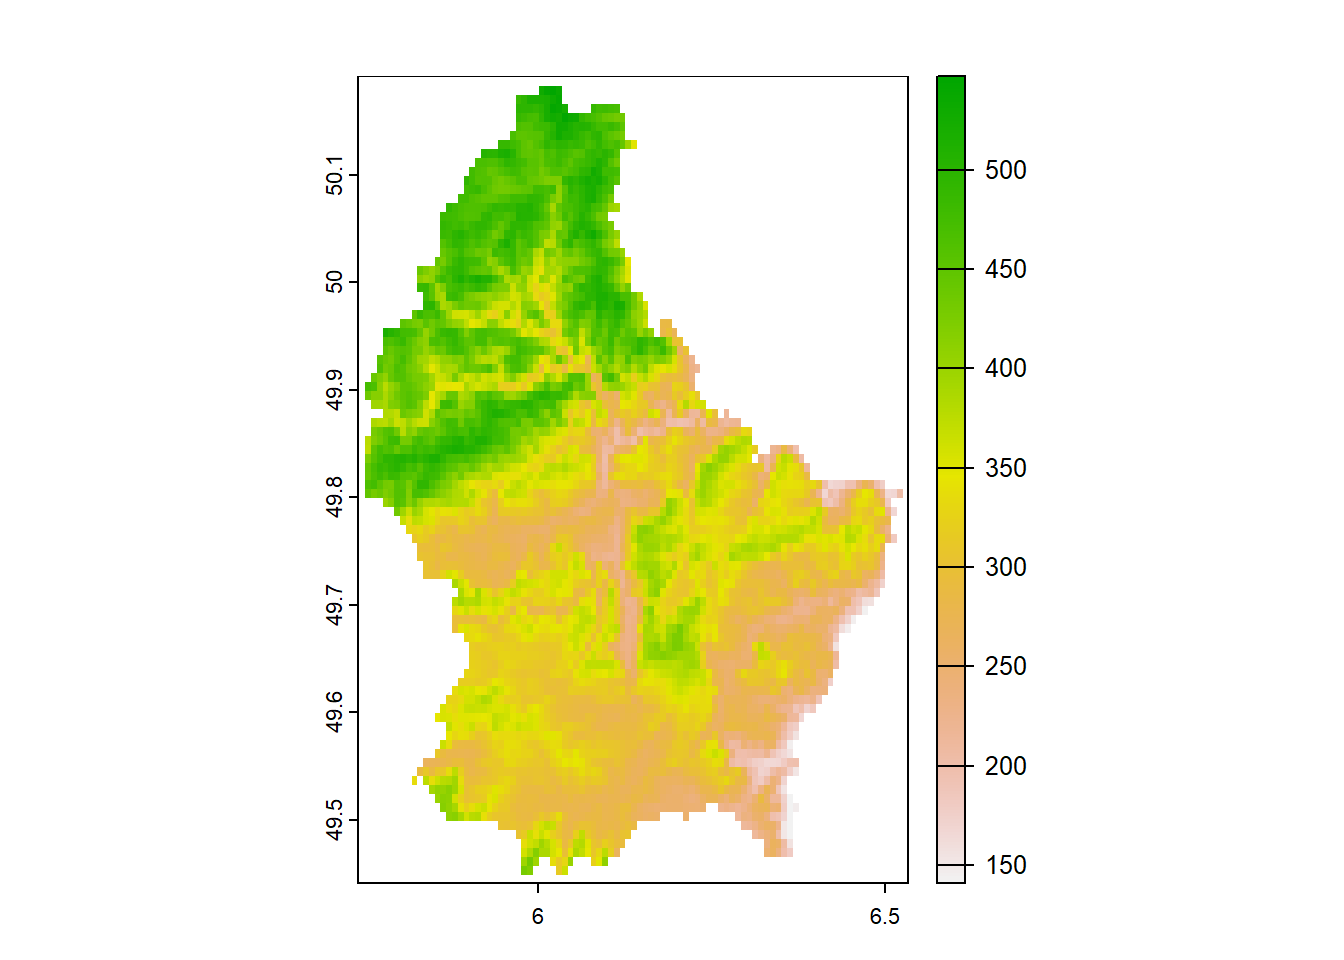 Example of areal data. Elevation at raster grid cells covering Luxembourg.